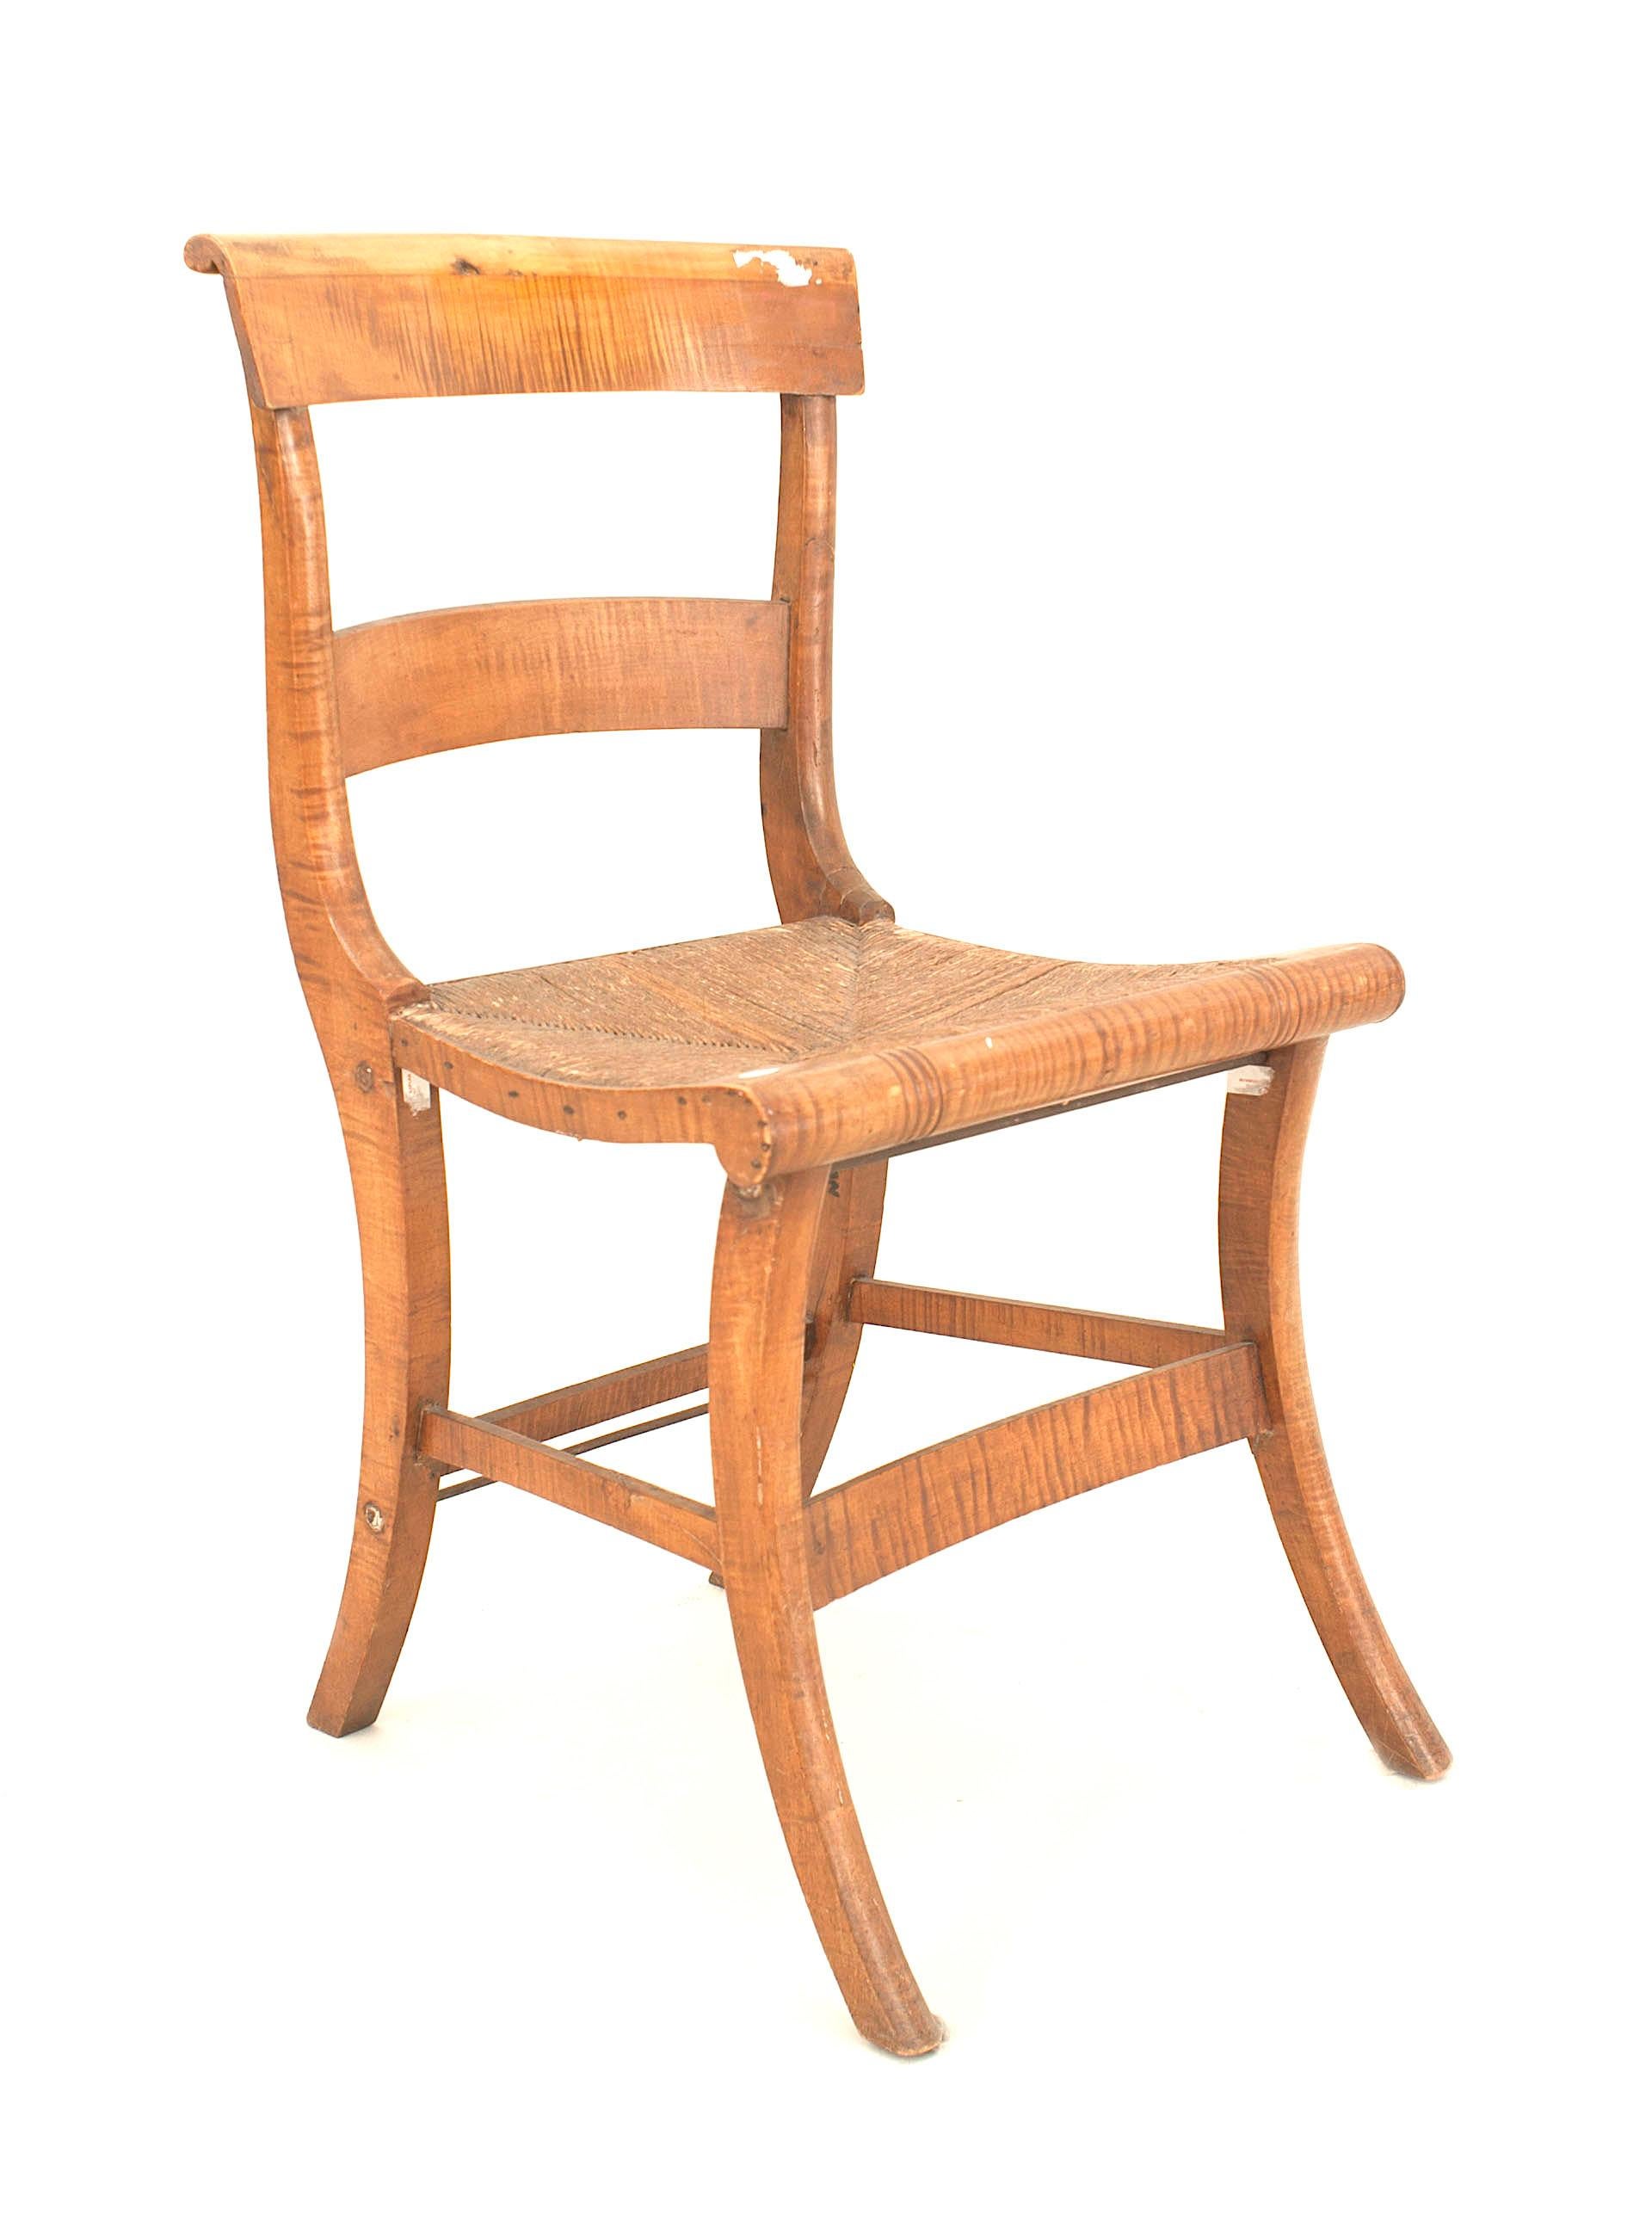 Set of 4 American Country Federal style (19th Cent) tiger maple side chairs with a stretcher and rush seat
